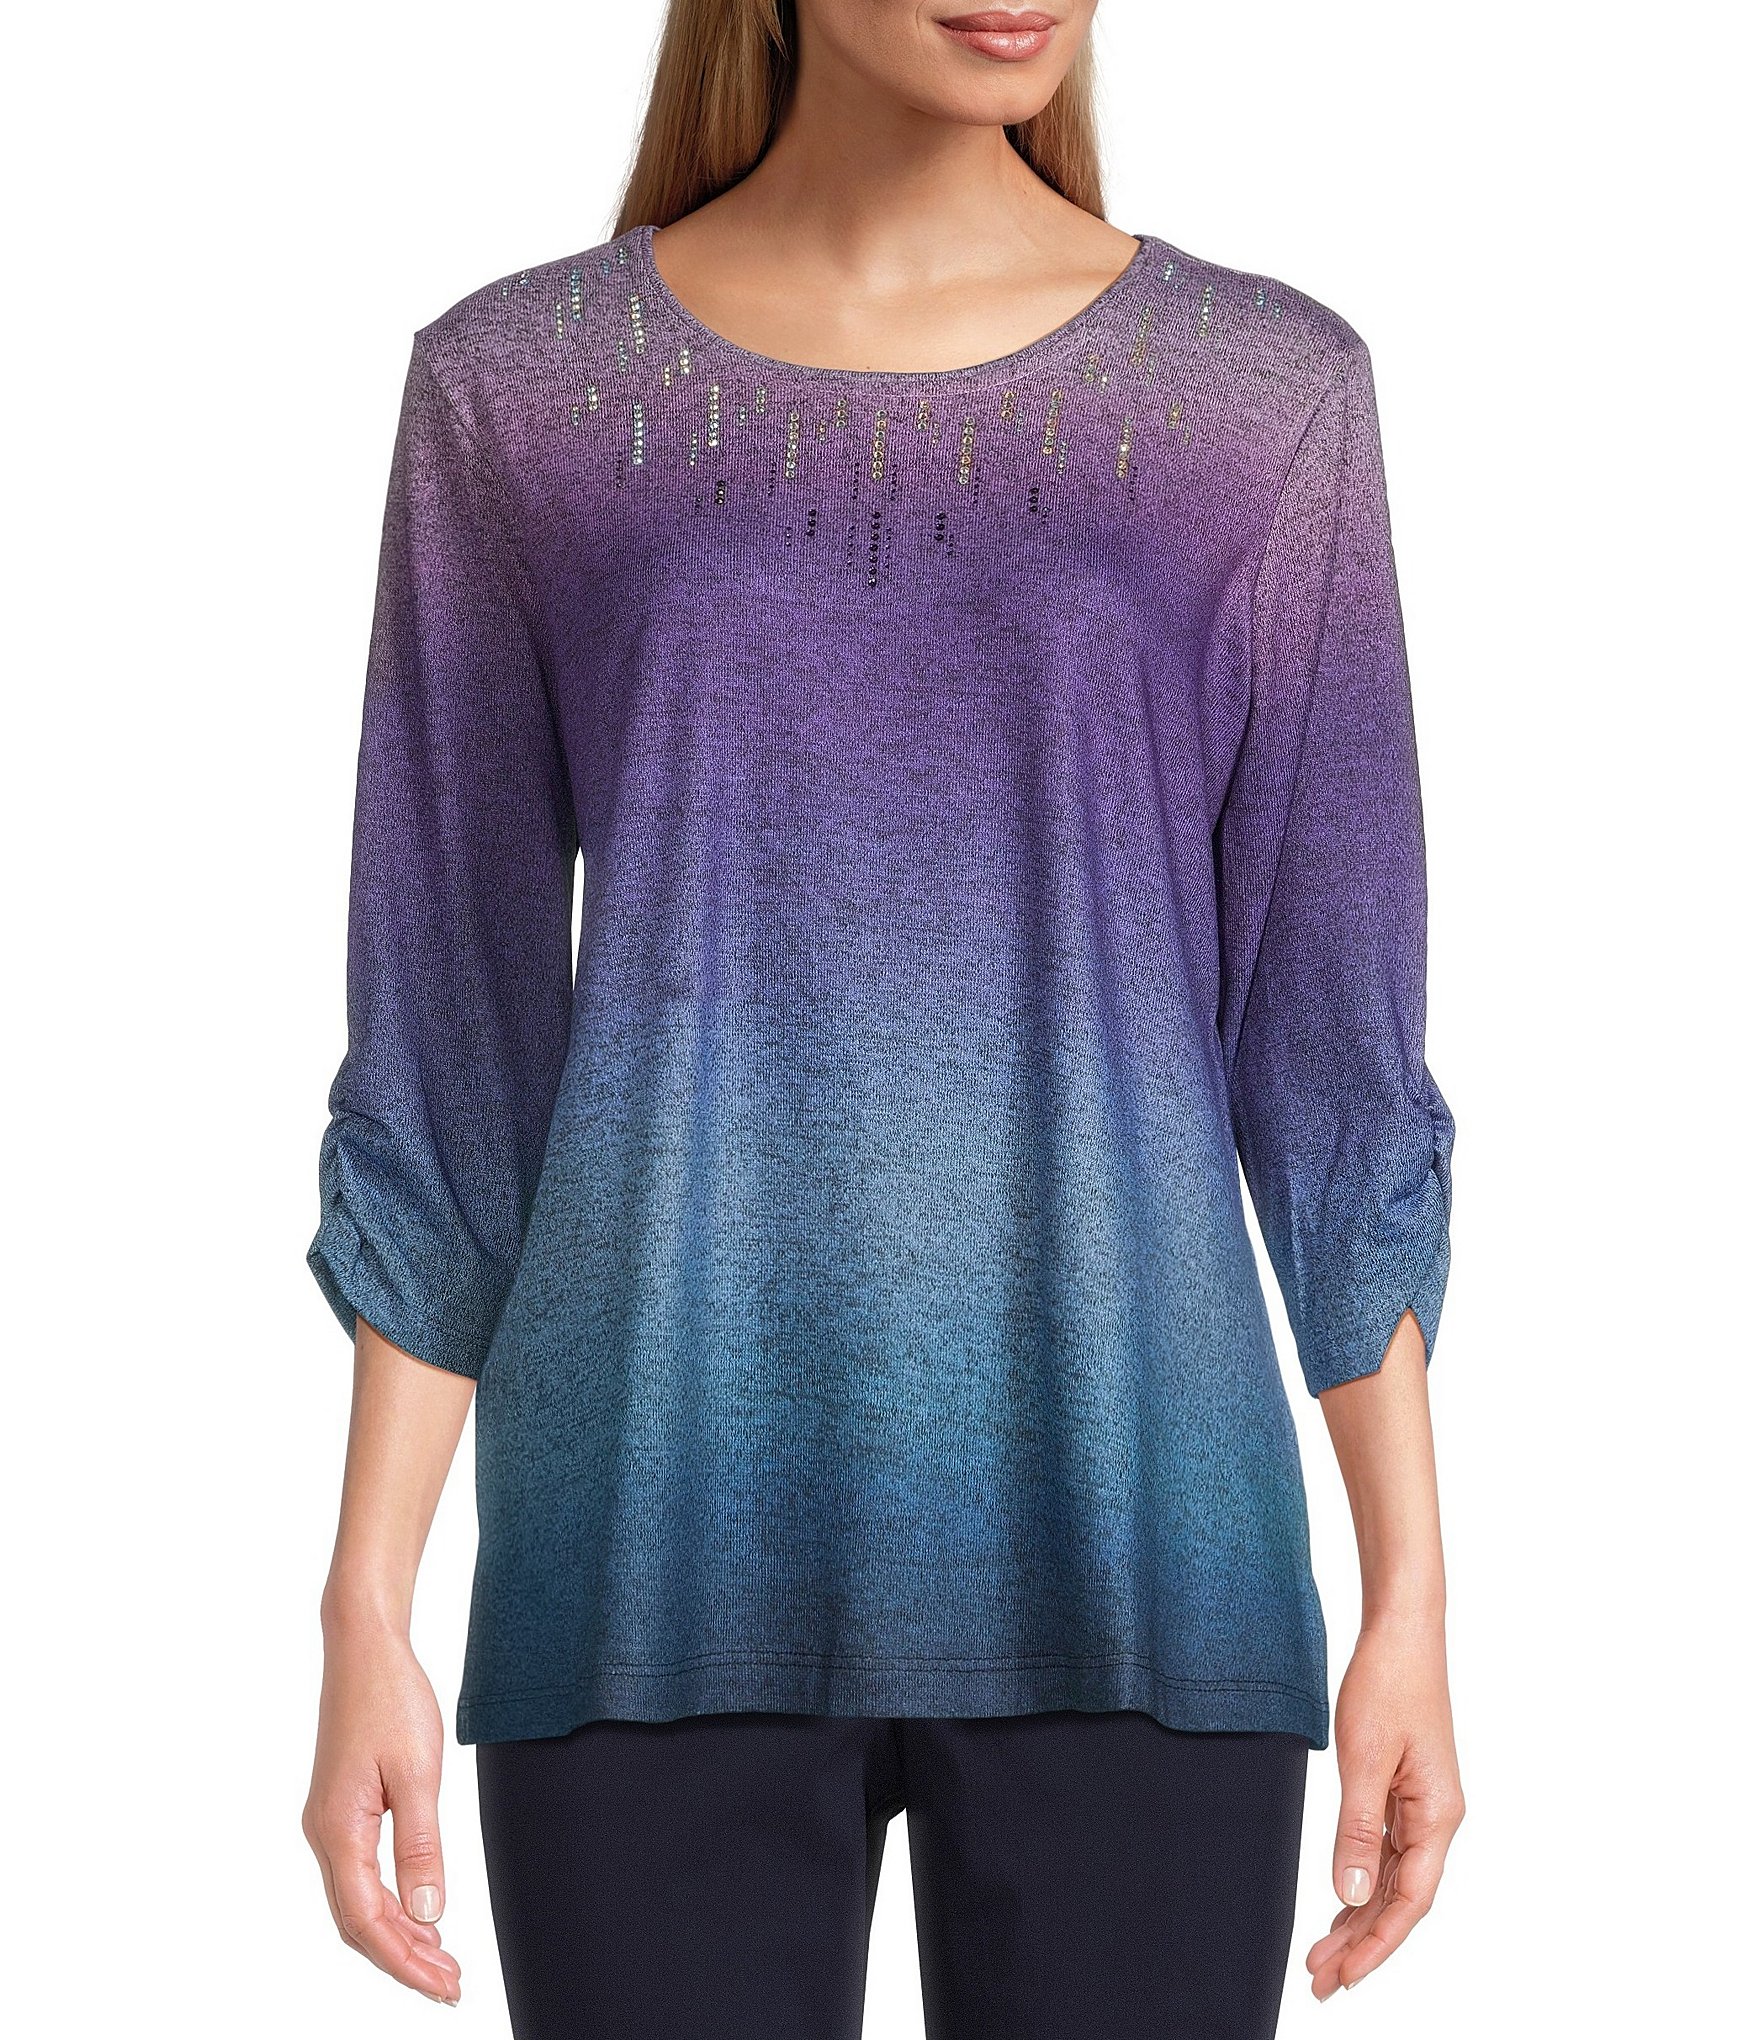 Allison Daley Embellished 3/4 Ruched Sleeve Crew Neck Knit Abstract ...